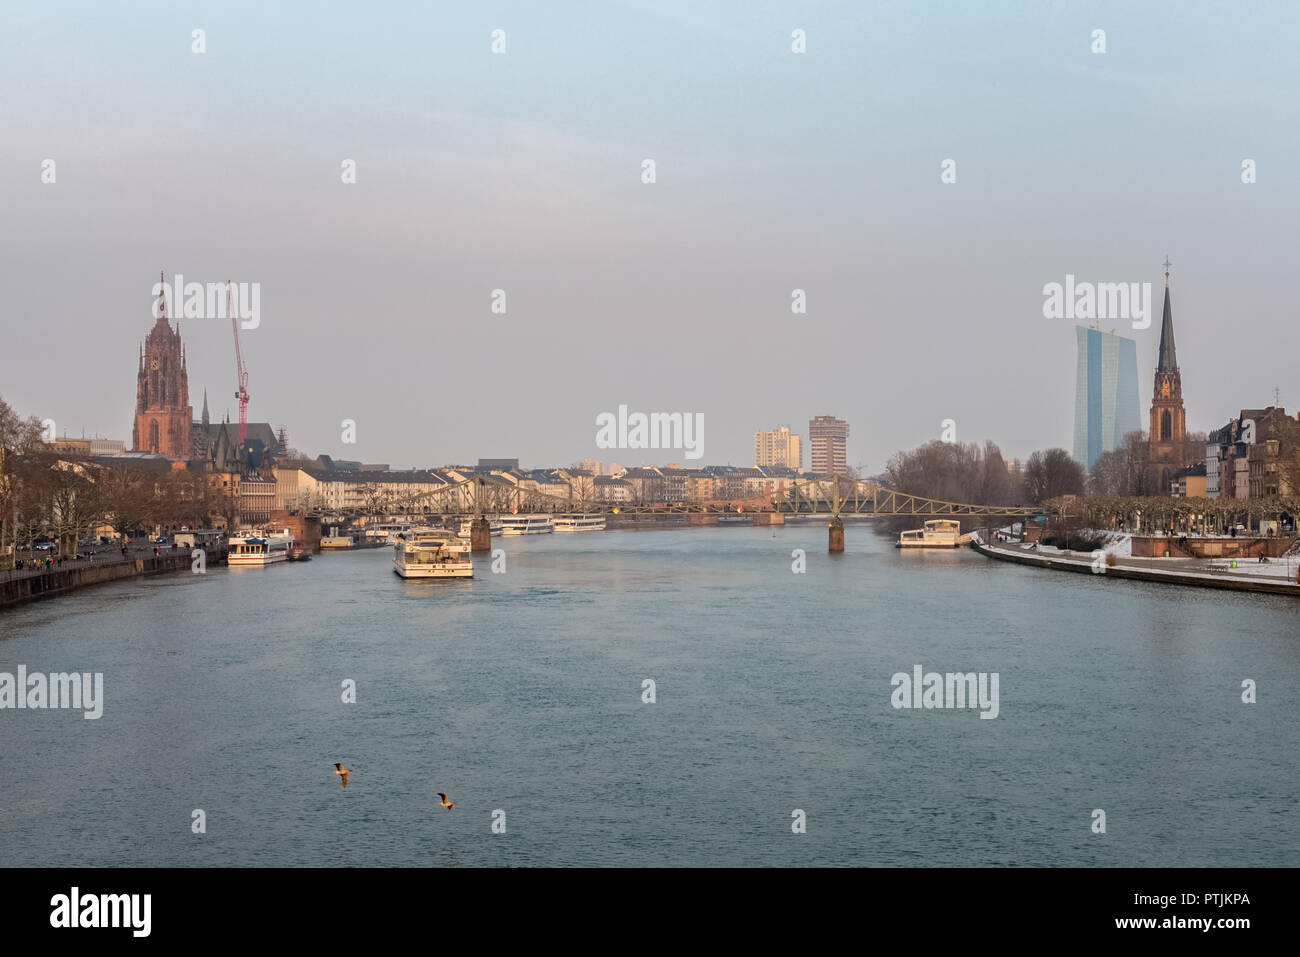 FRANKFURT(MAIN),GERMANY - MARCH 03,2018: The Main It's the big river in the direction to the opera and the Europaeische Zentralbank. Stock Photo